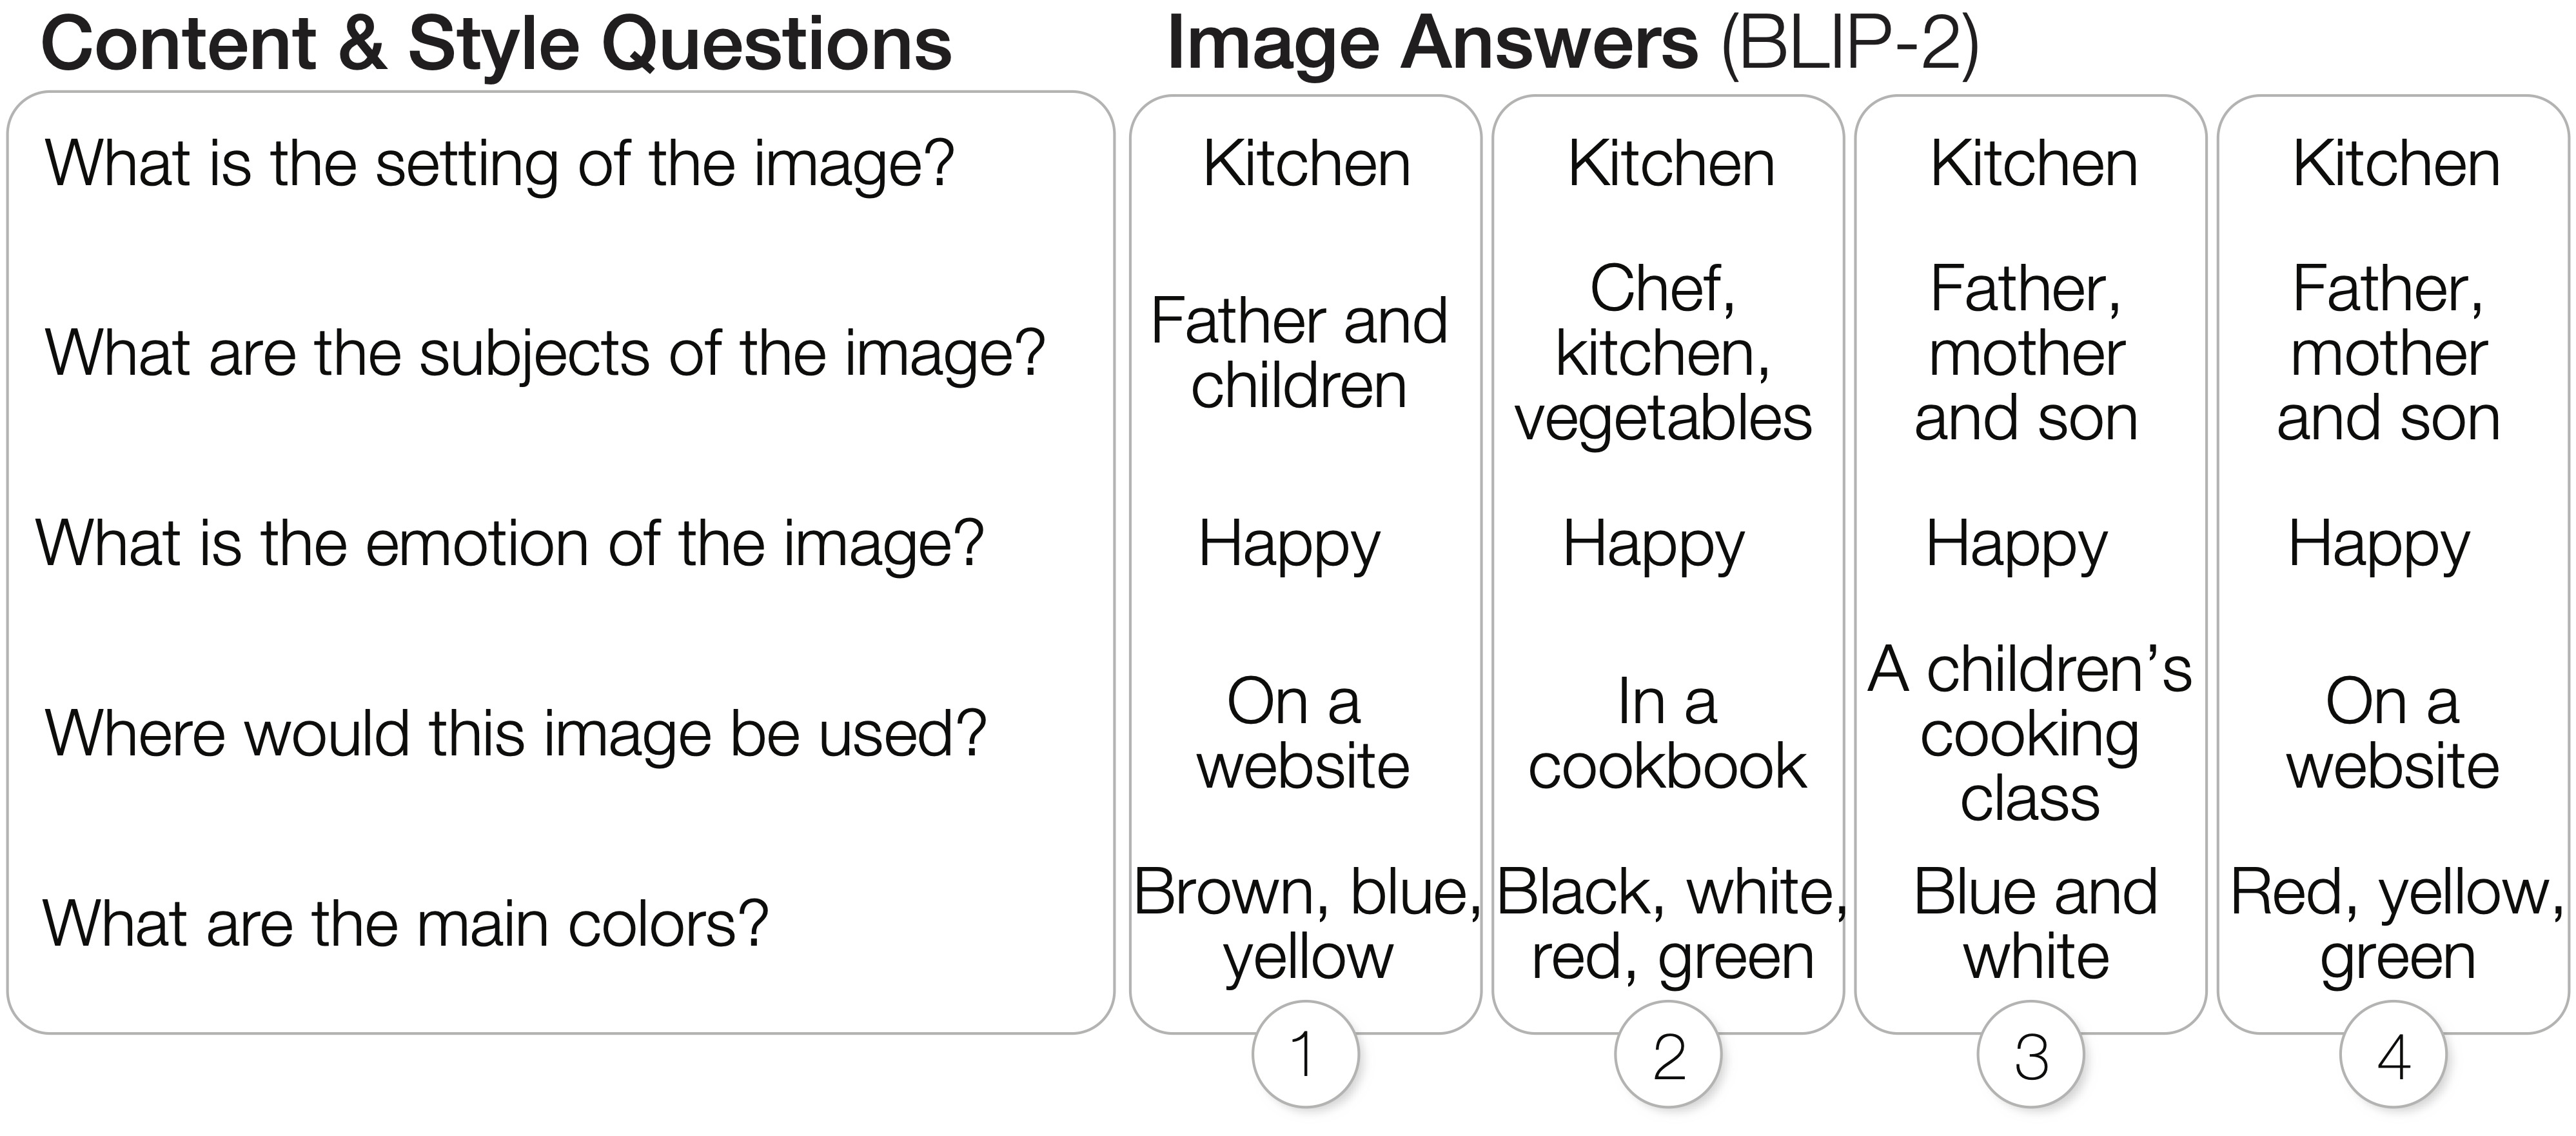 This image illustrates an example of content and style questions answered by BLIP-2. The answers are provided for the same tutorial images. For the question ``What is the setting of the image?'', the answers are all kitchen. For the question ``What are the subjects of the image?'', the answers are father and children for the first image, chef, kitchen and vegetables for the second image, father, mother and son for the third and fourth image. For the question ``What is the emotion of the image?'', all answers are happy. For the question about the usage ``Where would this image be used?'', the answers are ``on a website'', ``in a cookbook'', ``a children's cooking class'', and ``on a website''. Finally, for the question ``What are the main colors?'', the first image answers ``Brown, blue, yellow'', the second image answers ``Black, white, red, green'', the third image answers ``blue and white'', and the final image answers ``Red, yellow, green''.